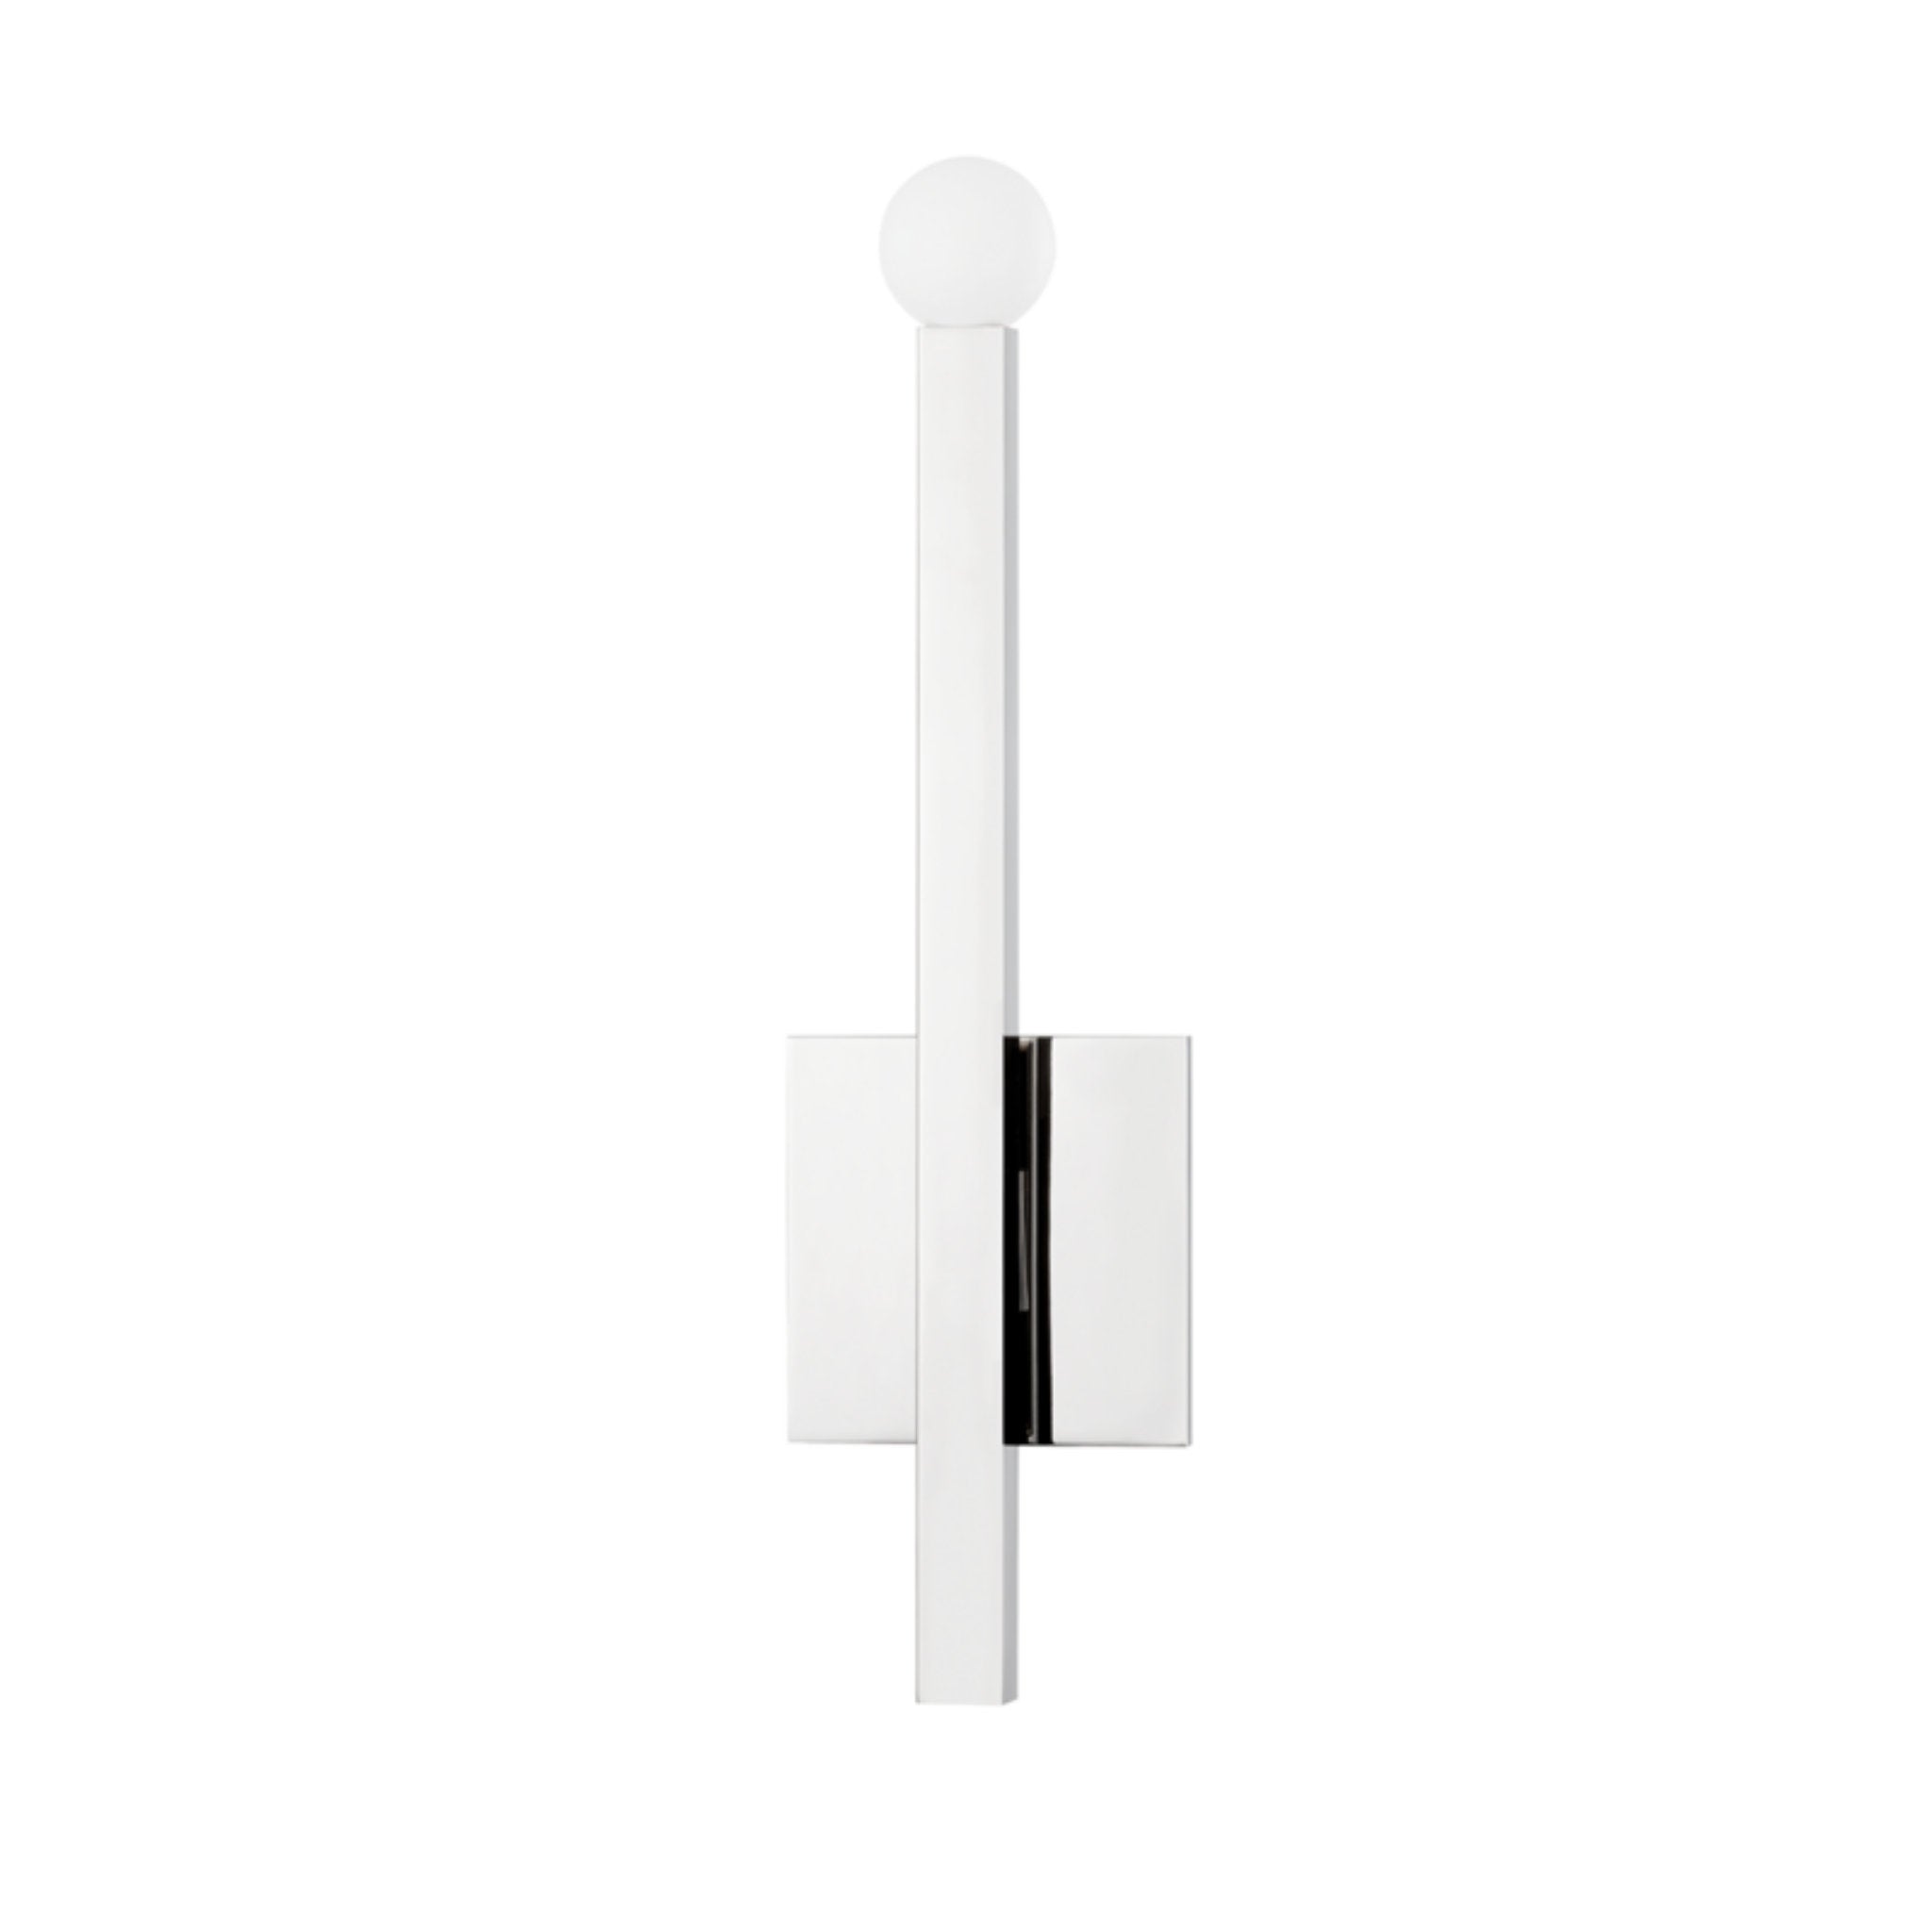 Dona 1-Light Wall Sconce in Polished Nickel